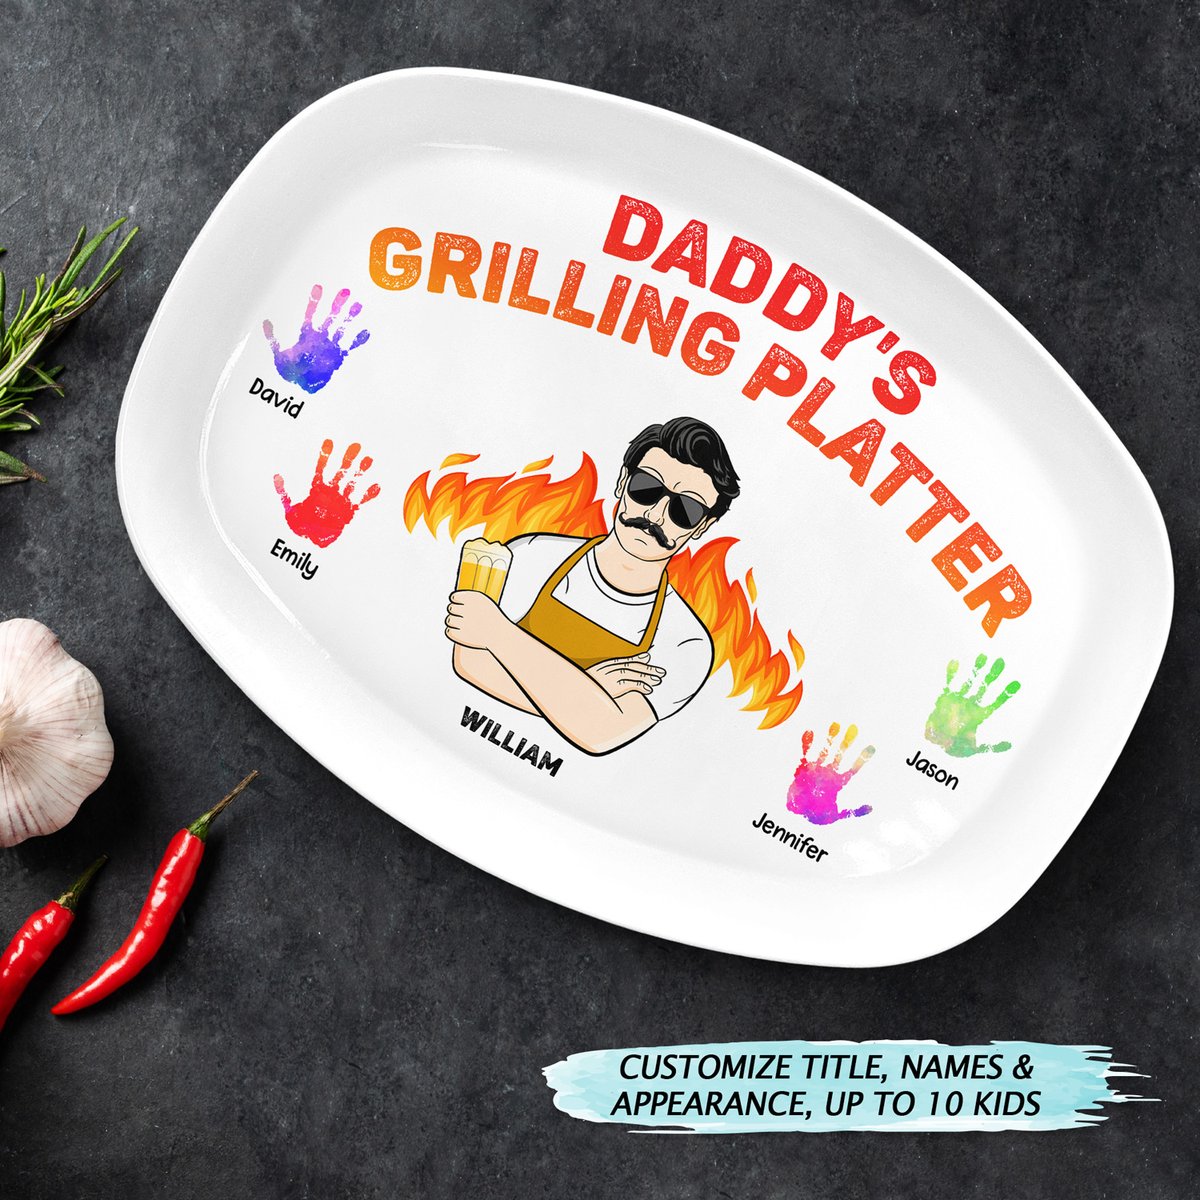 Dad's New Cooking Gear Unlocked ❤️‍🔥 👉 Order here: wanderprints.com/pt1168hel1051-… ✈ Worldwide Shipping! #wanderprints #plate #dad #father #cooking